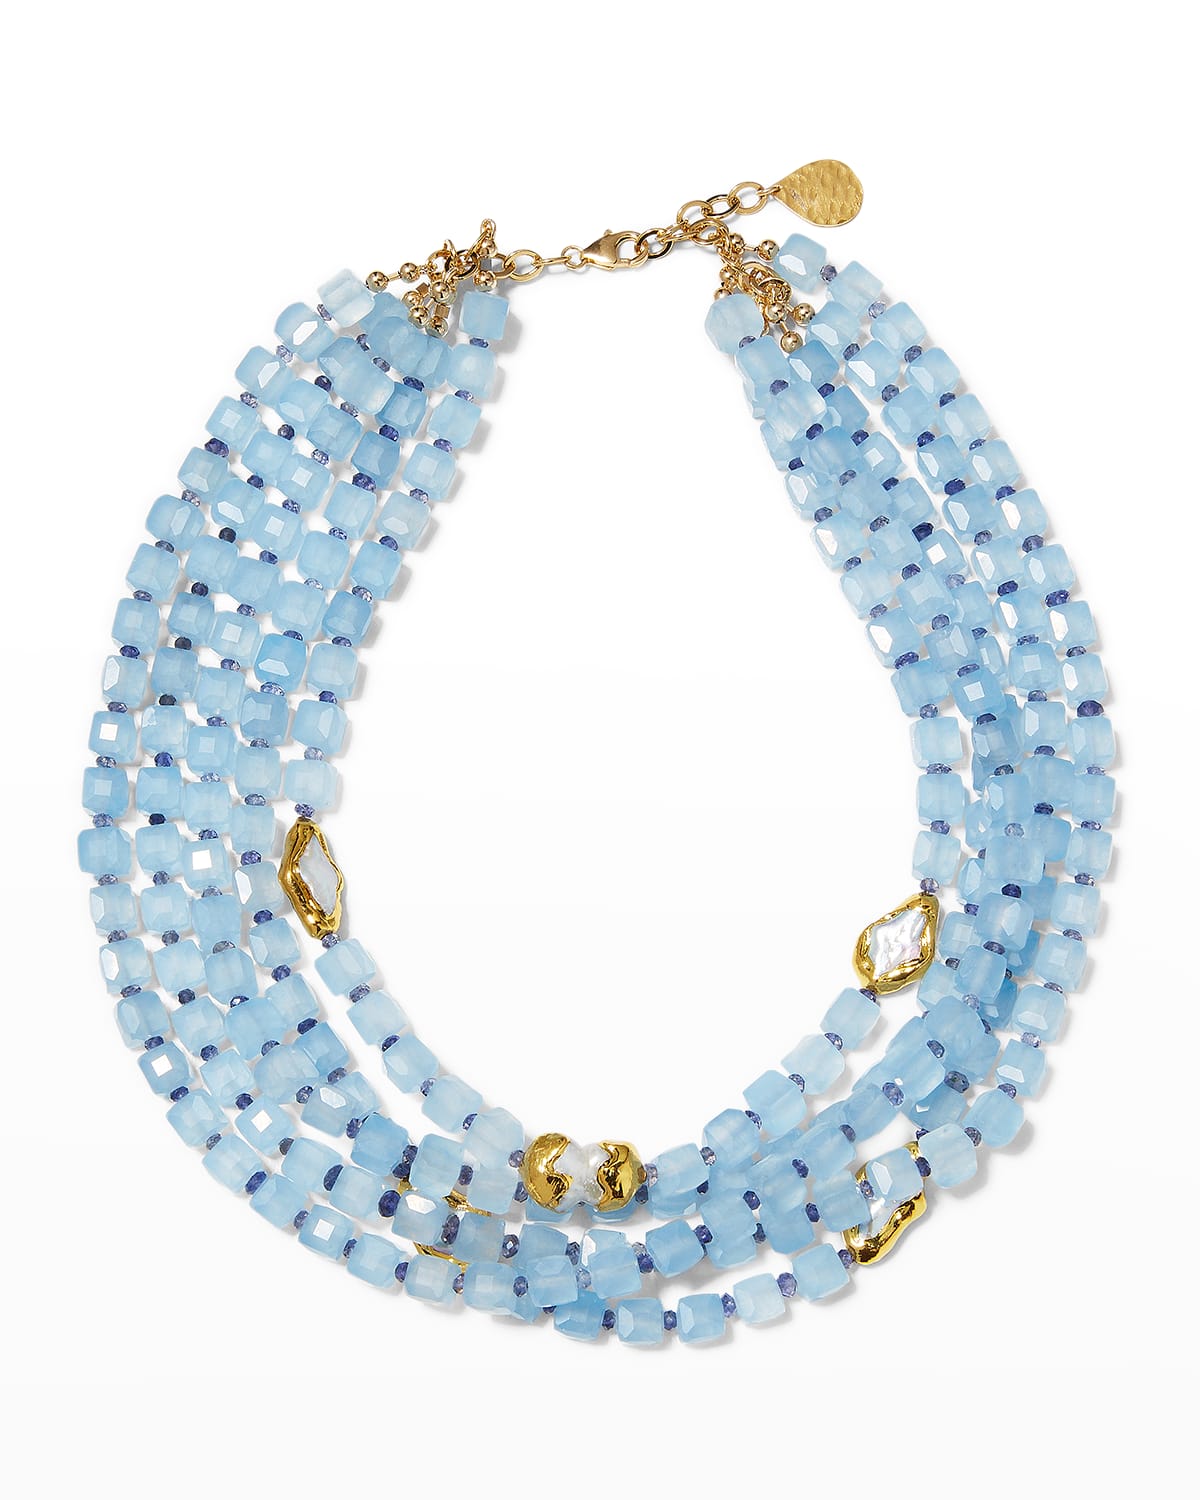 Devon Leigh Periwinkle Chalcedony Multi-Strand Necklace